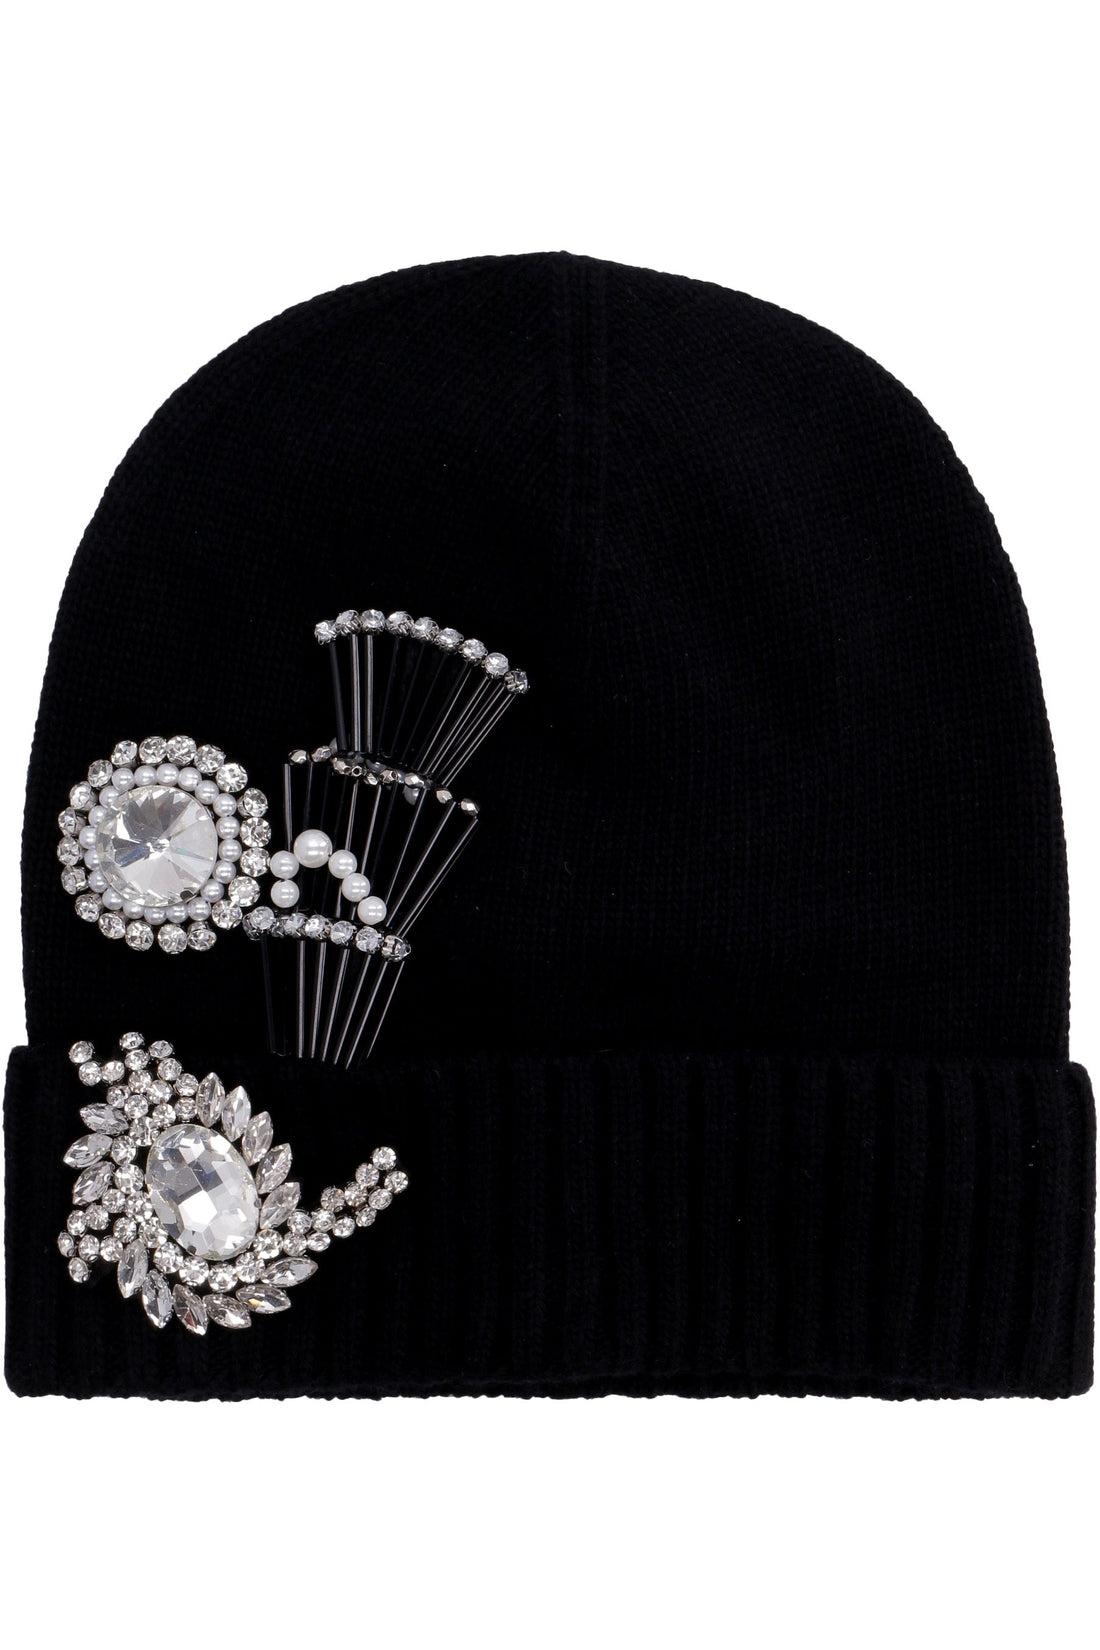 Pinko-OUTLET-SALE-Secco knitted beanie-ARCHIVIST